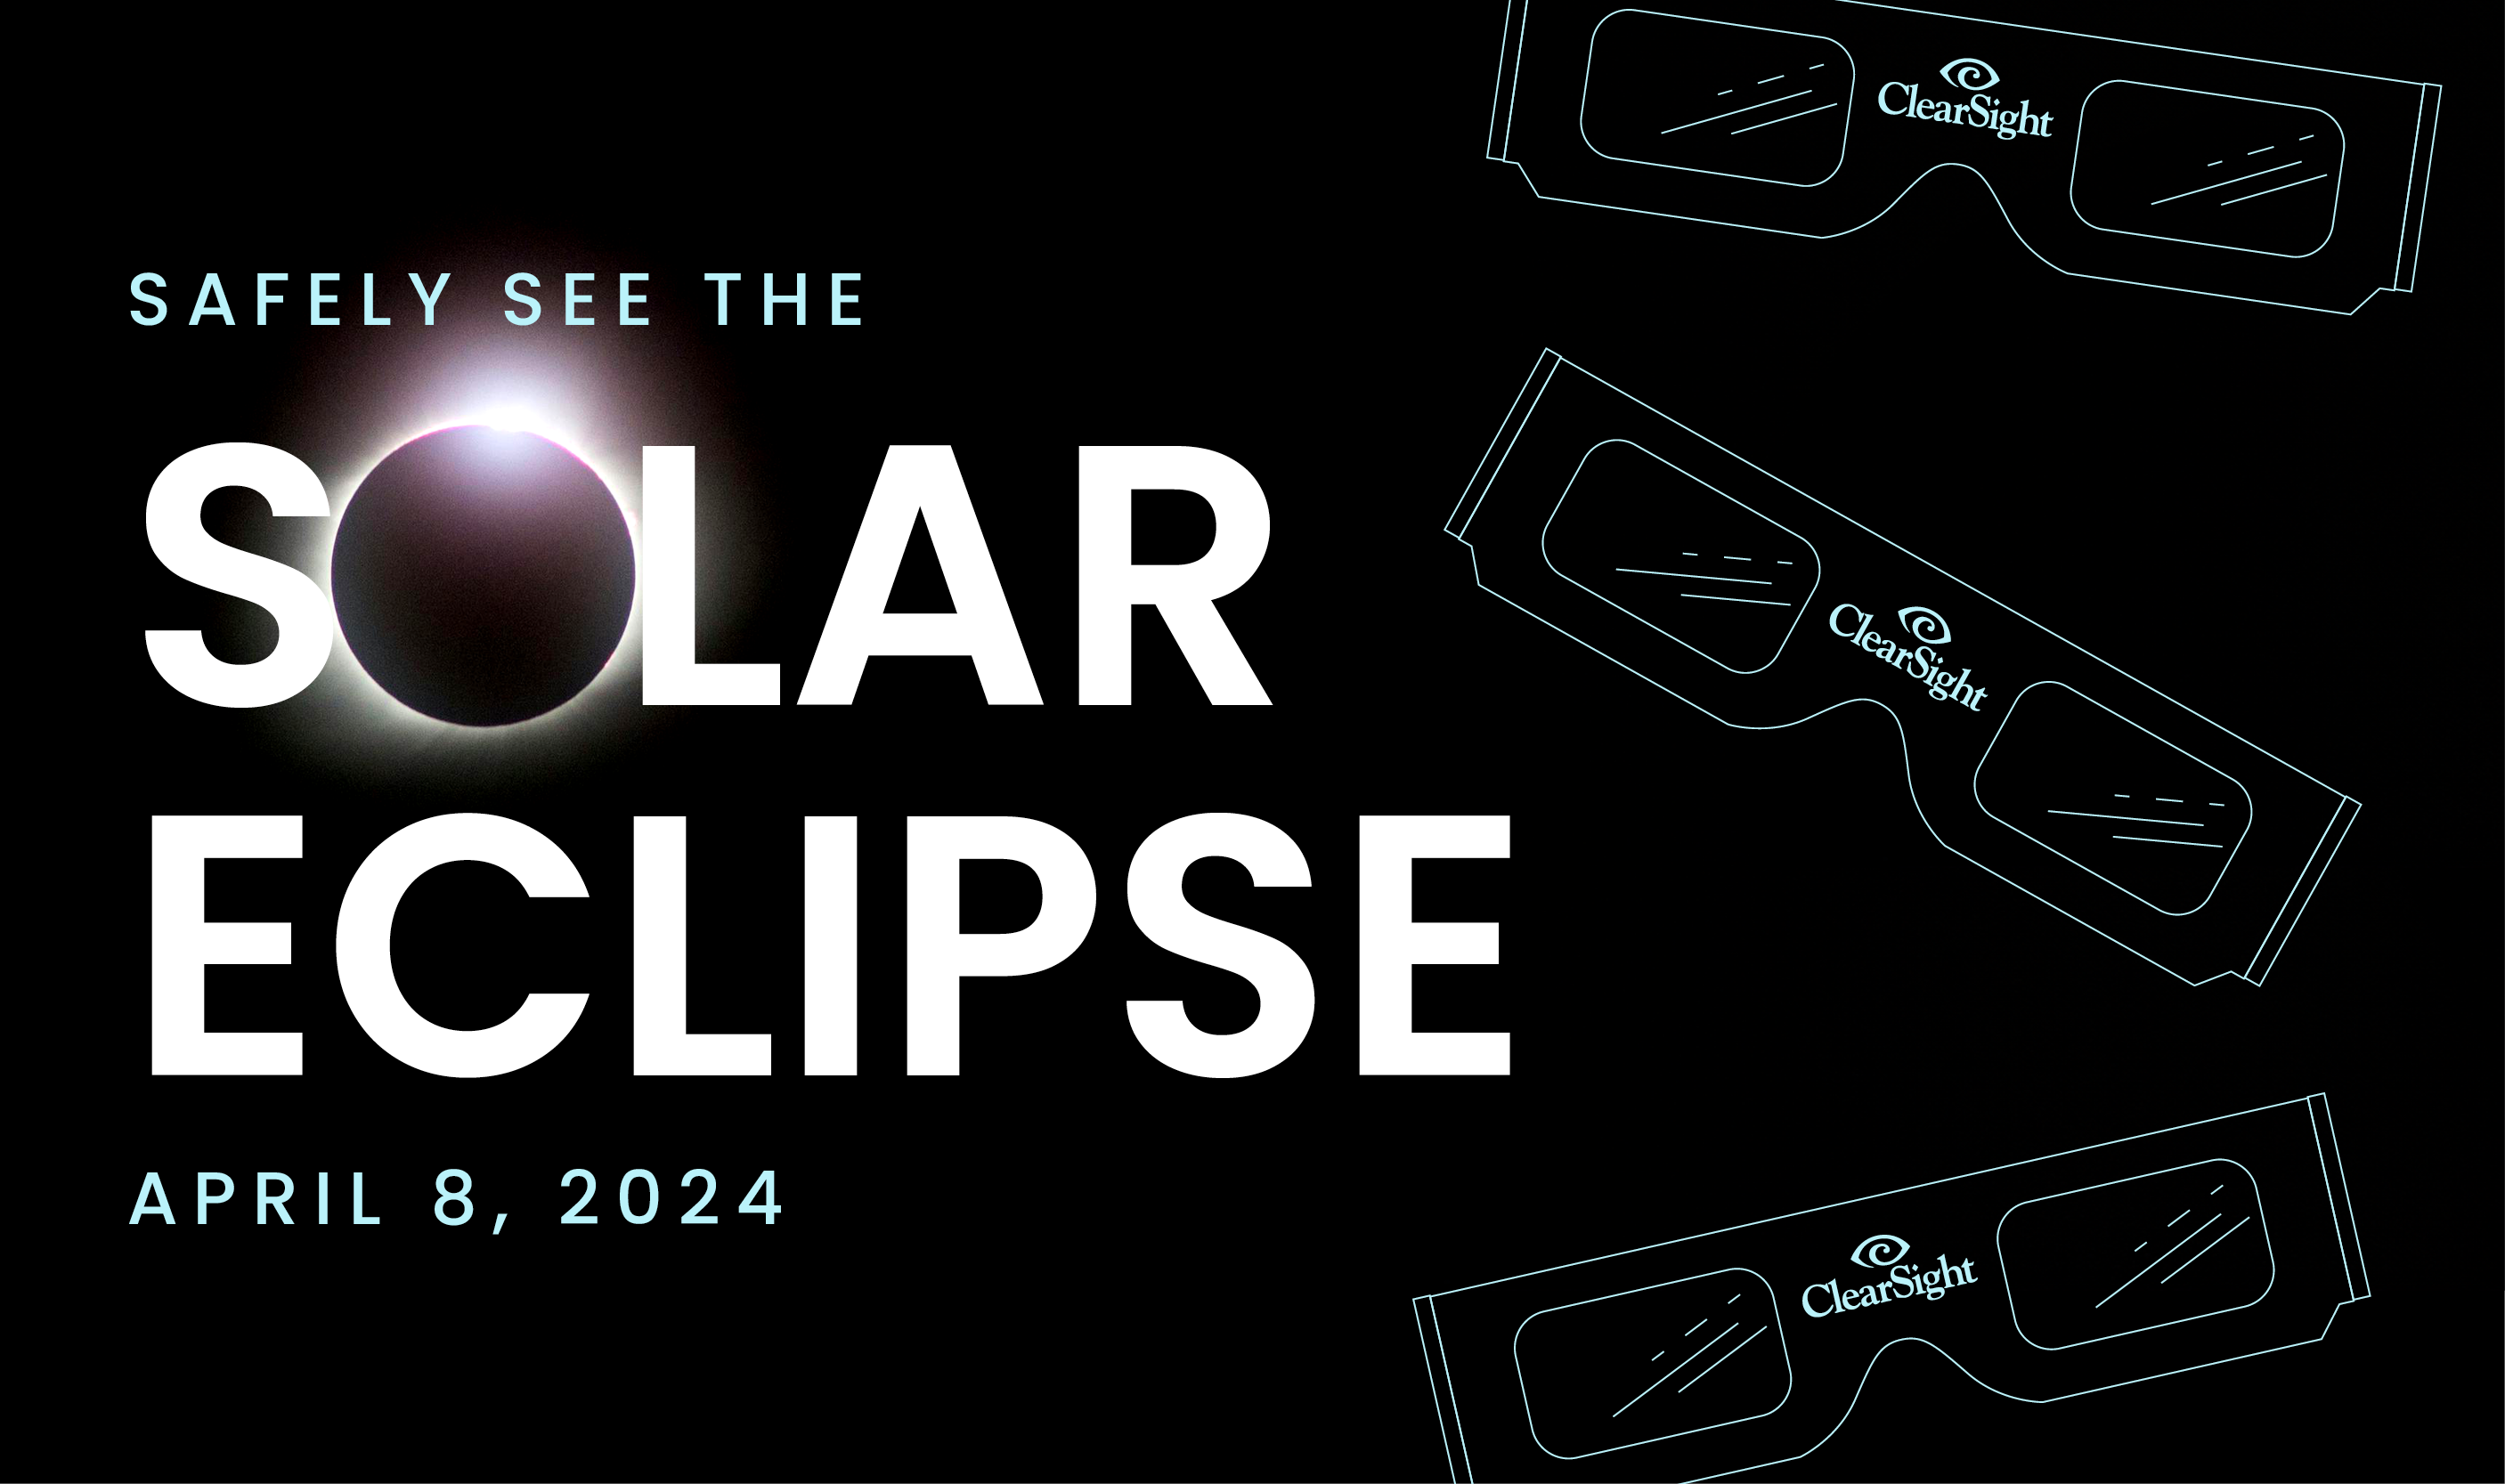 Safely see the Solar Eclipse on April 8, 2024